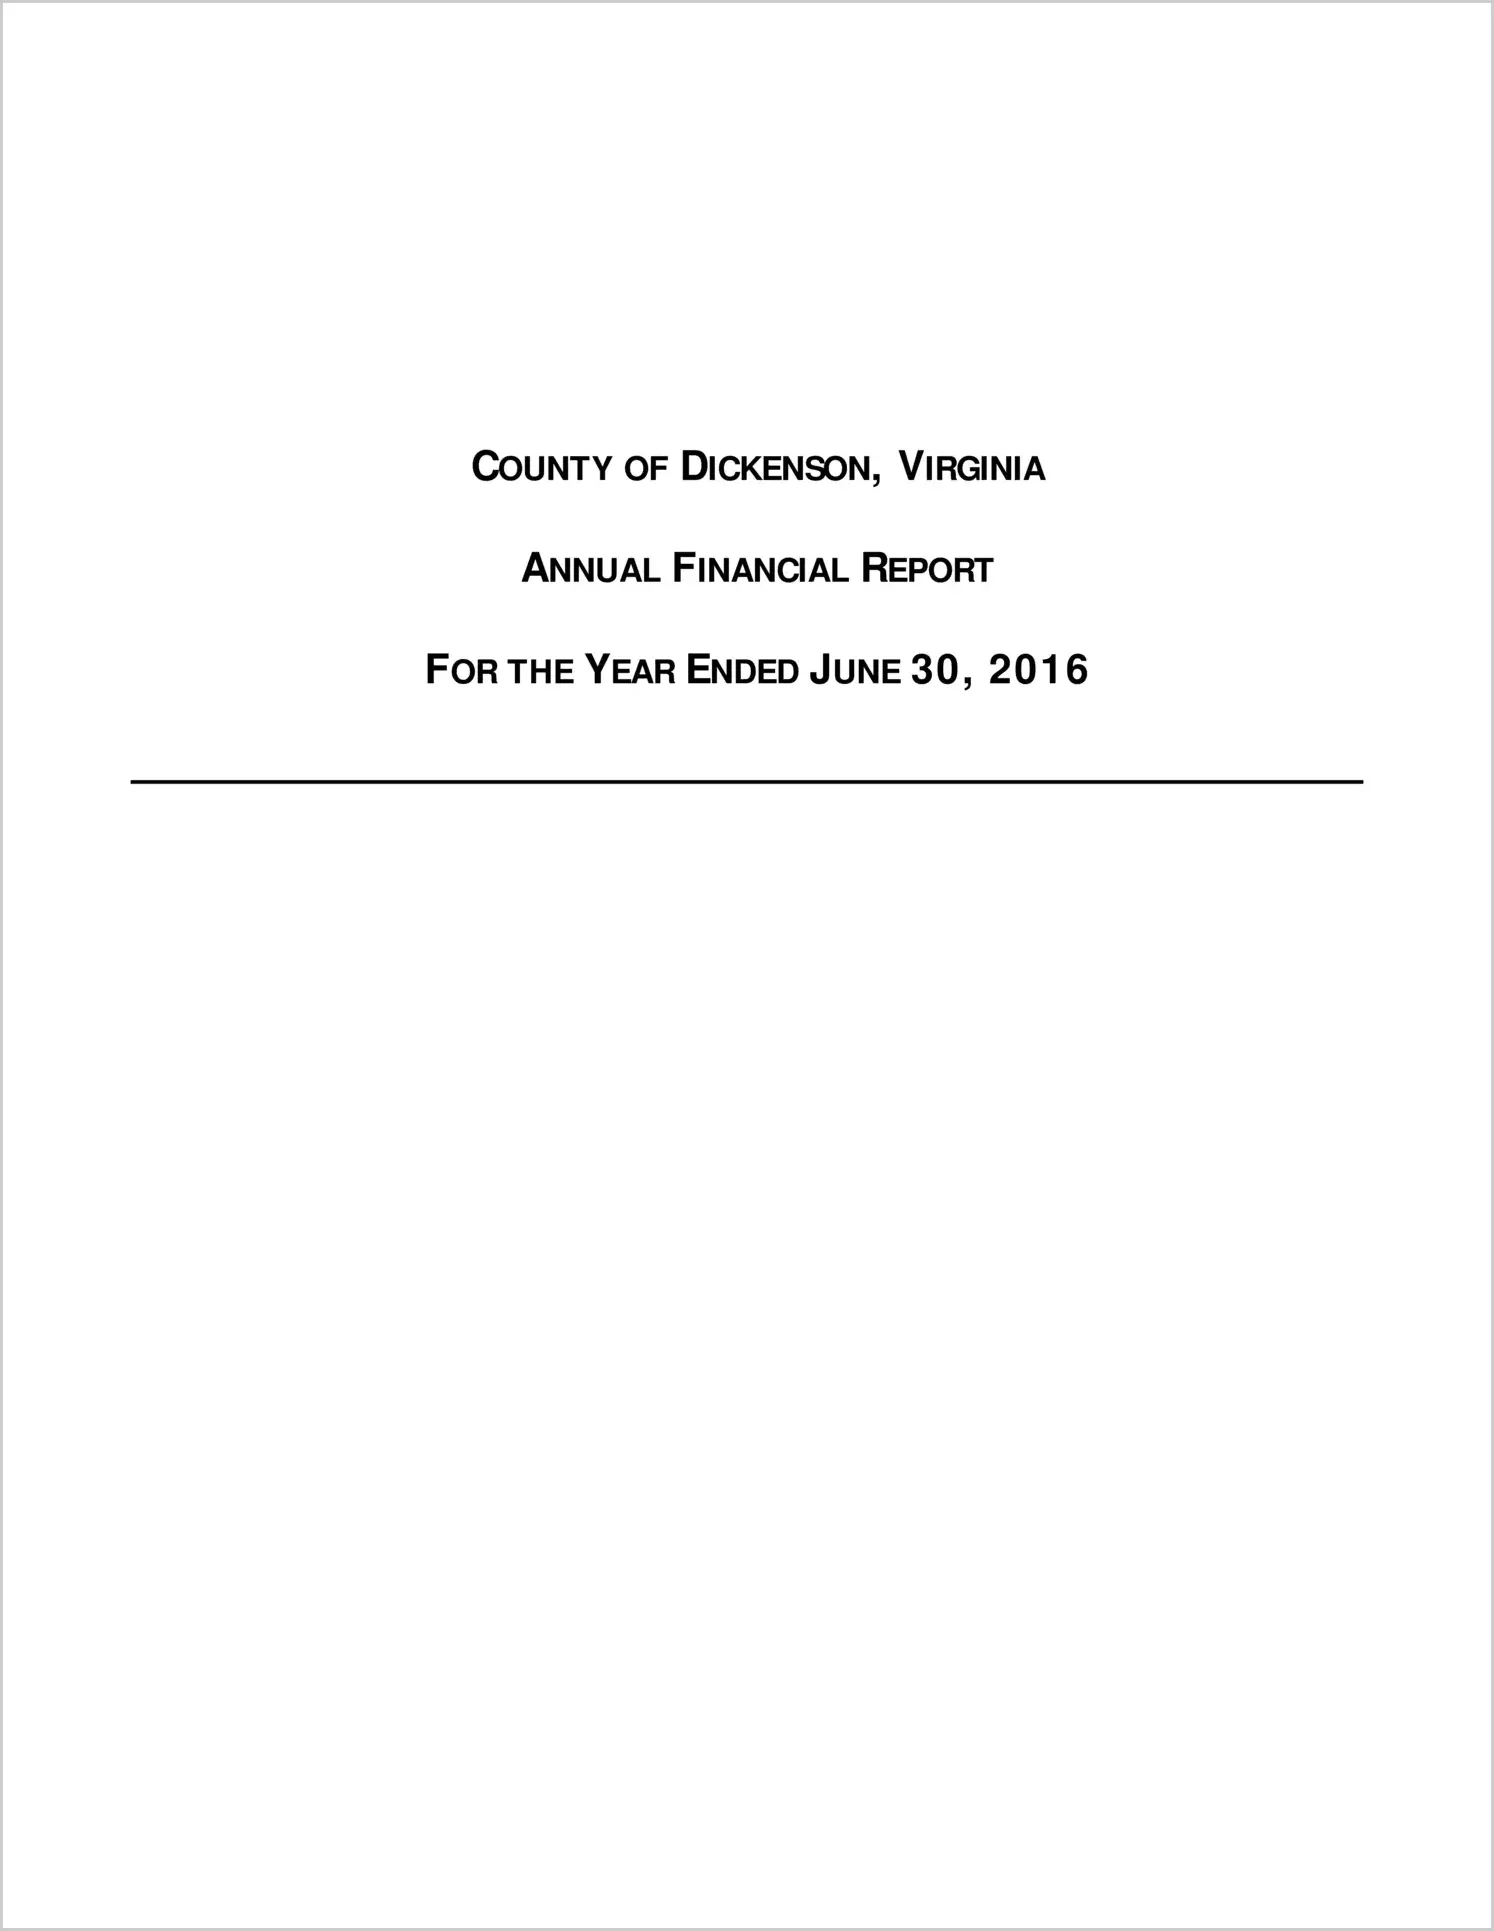 2016 Annual Financial Report for County of Dickenson